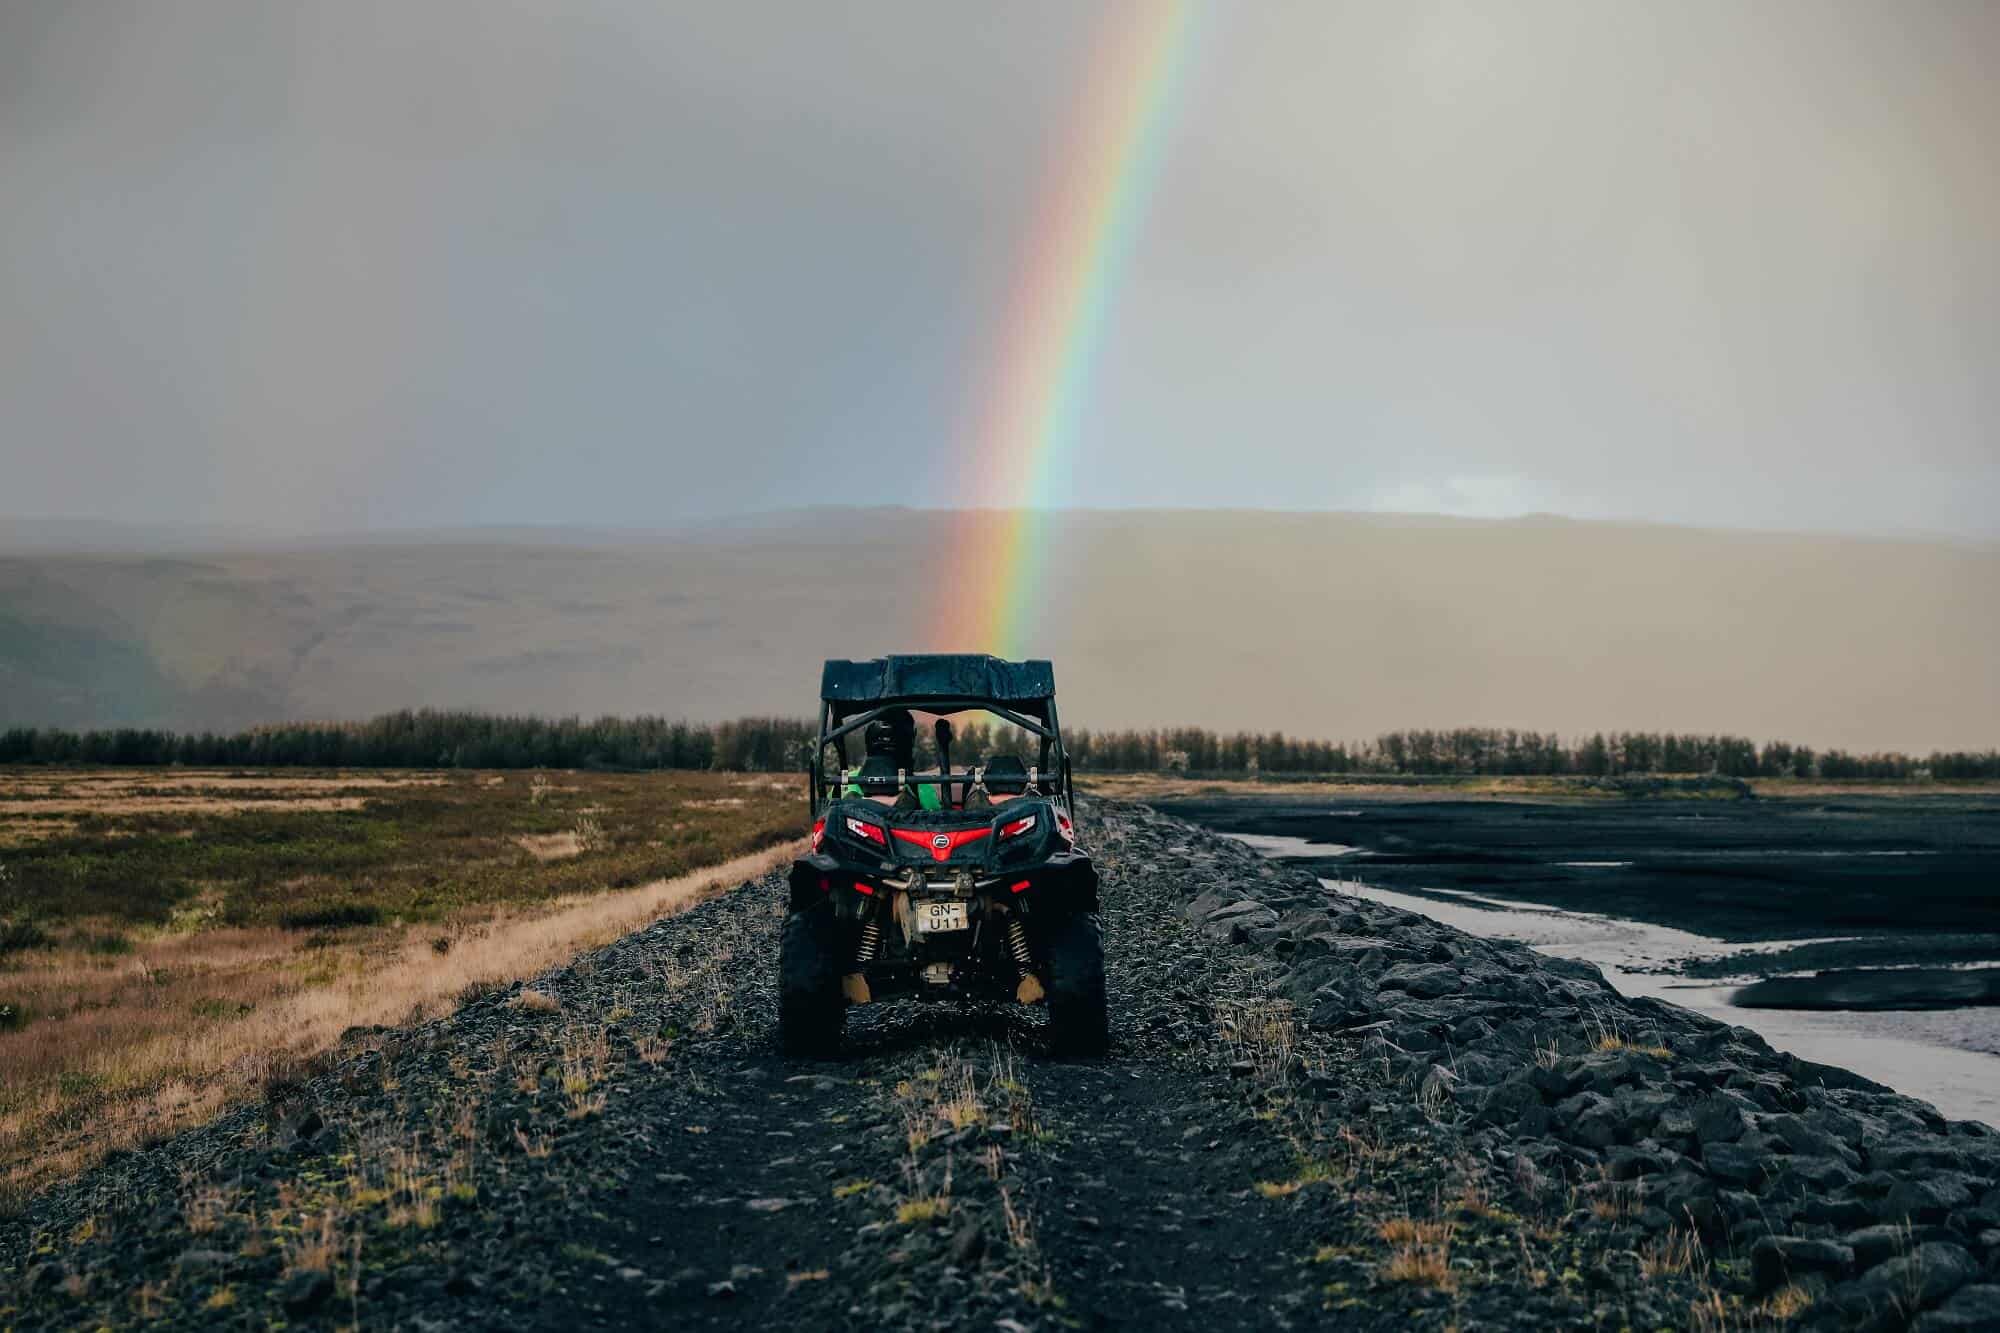 A rainbow soars above a buggy in south Iceland.